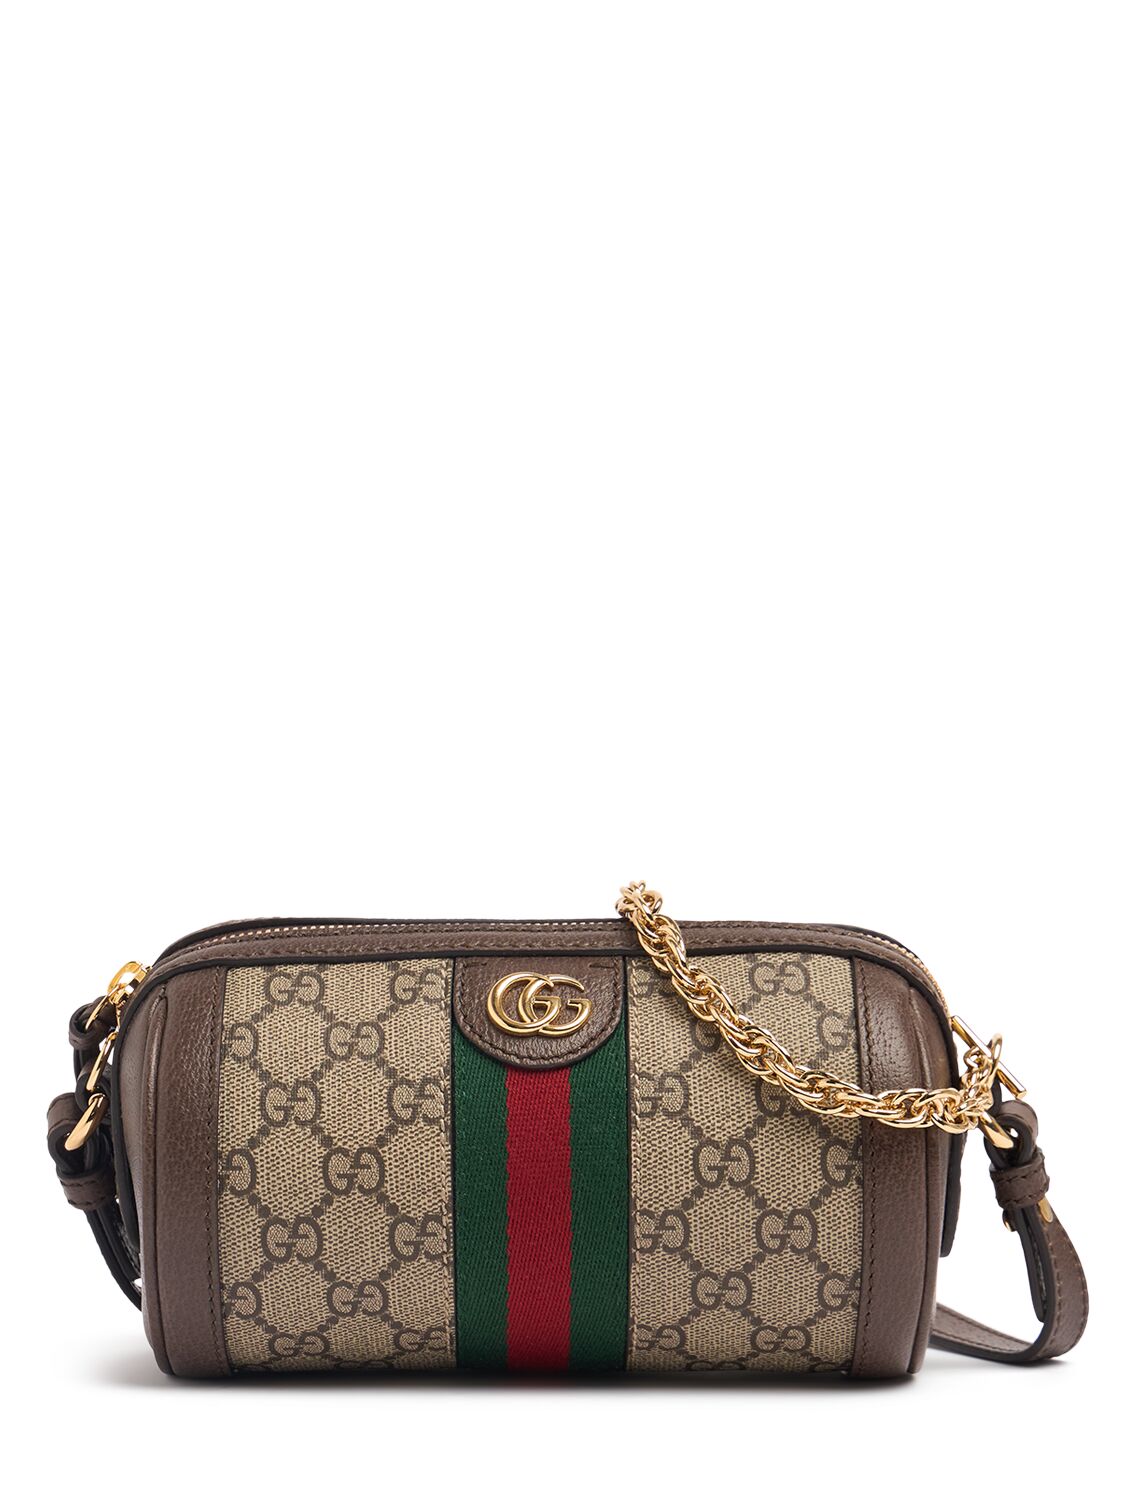 Gucci Ophidia Canvas Shoulder Bag In Beige/ebony